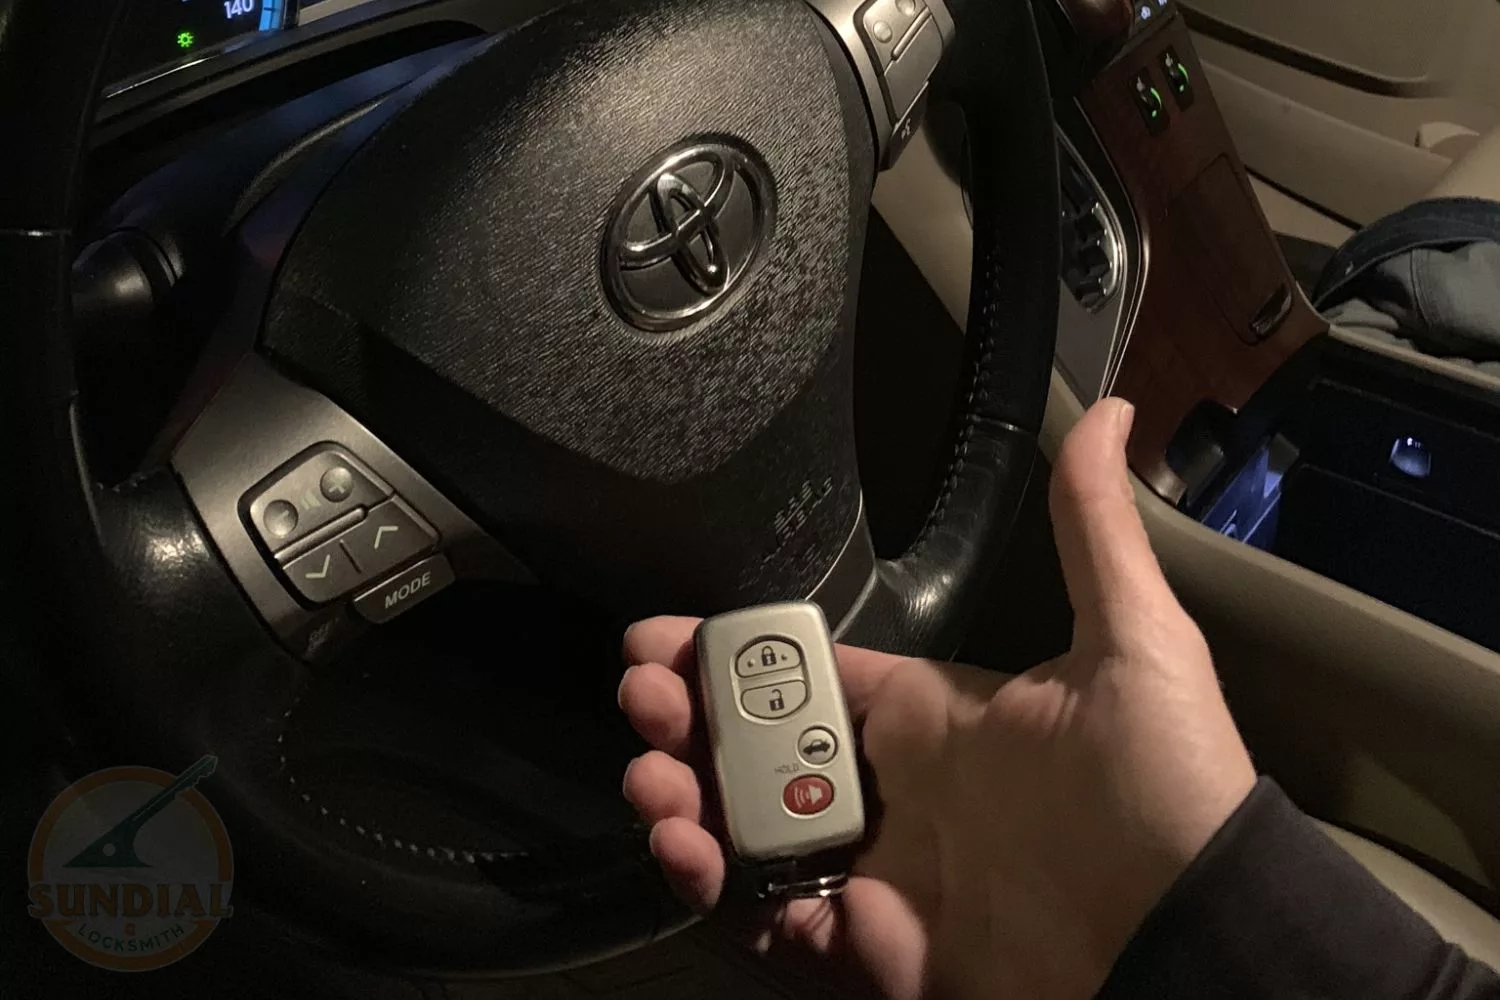 Hand holding a car key fob in front of a Toyota vehicle's steering wheel and dashboard at night.